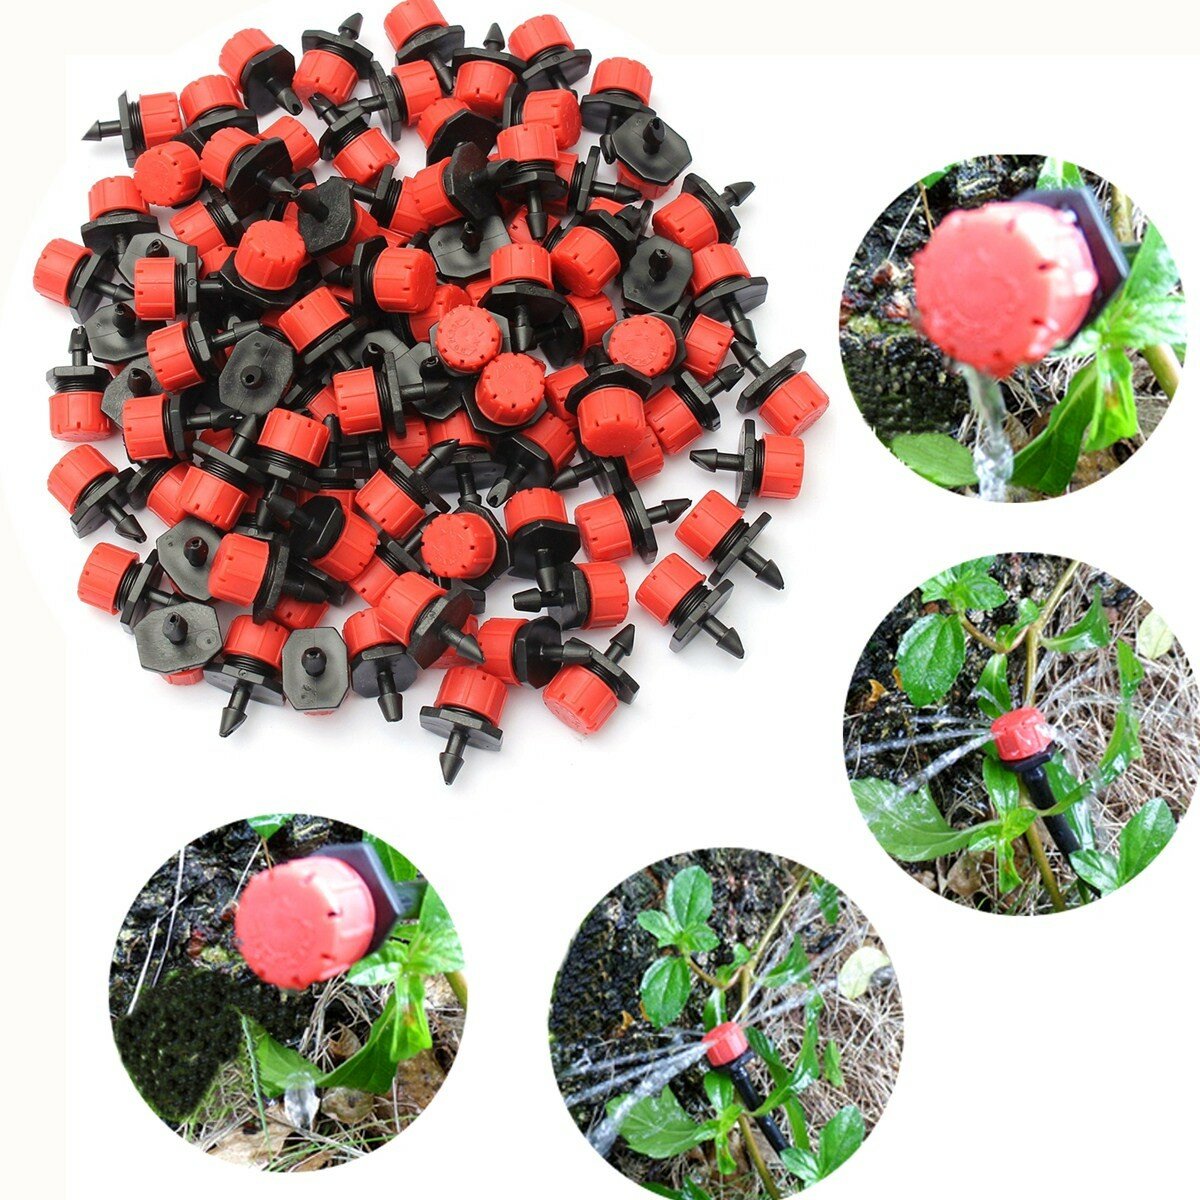 100Pcs Adjustable Micro Drip Irrigation Watering Anti-clogging Emitter Dripper Watering System Automatic Hose Kits Conne